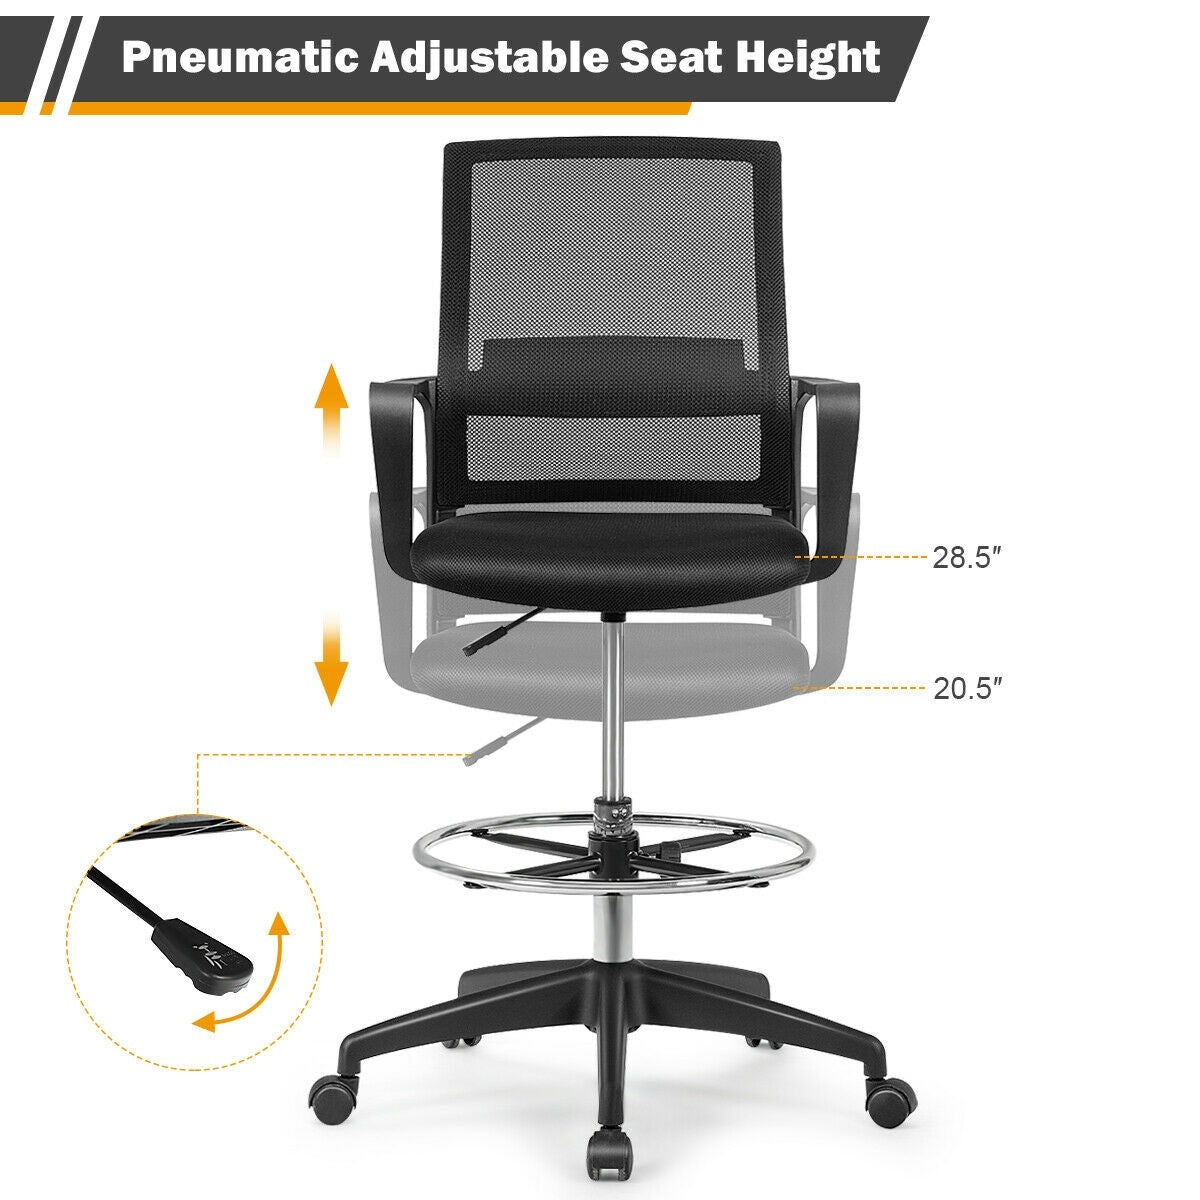 Mesh Drafting Chair, Tall Office Chair with Adjustable Foot Ring for Standing Desk